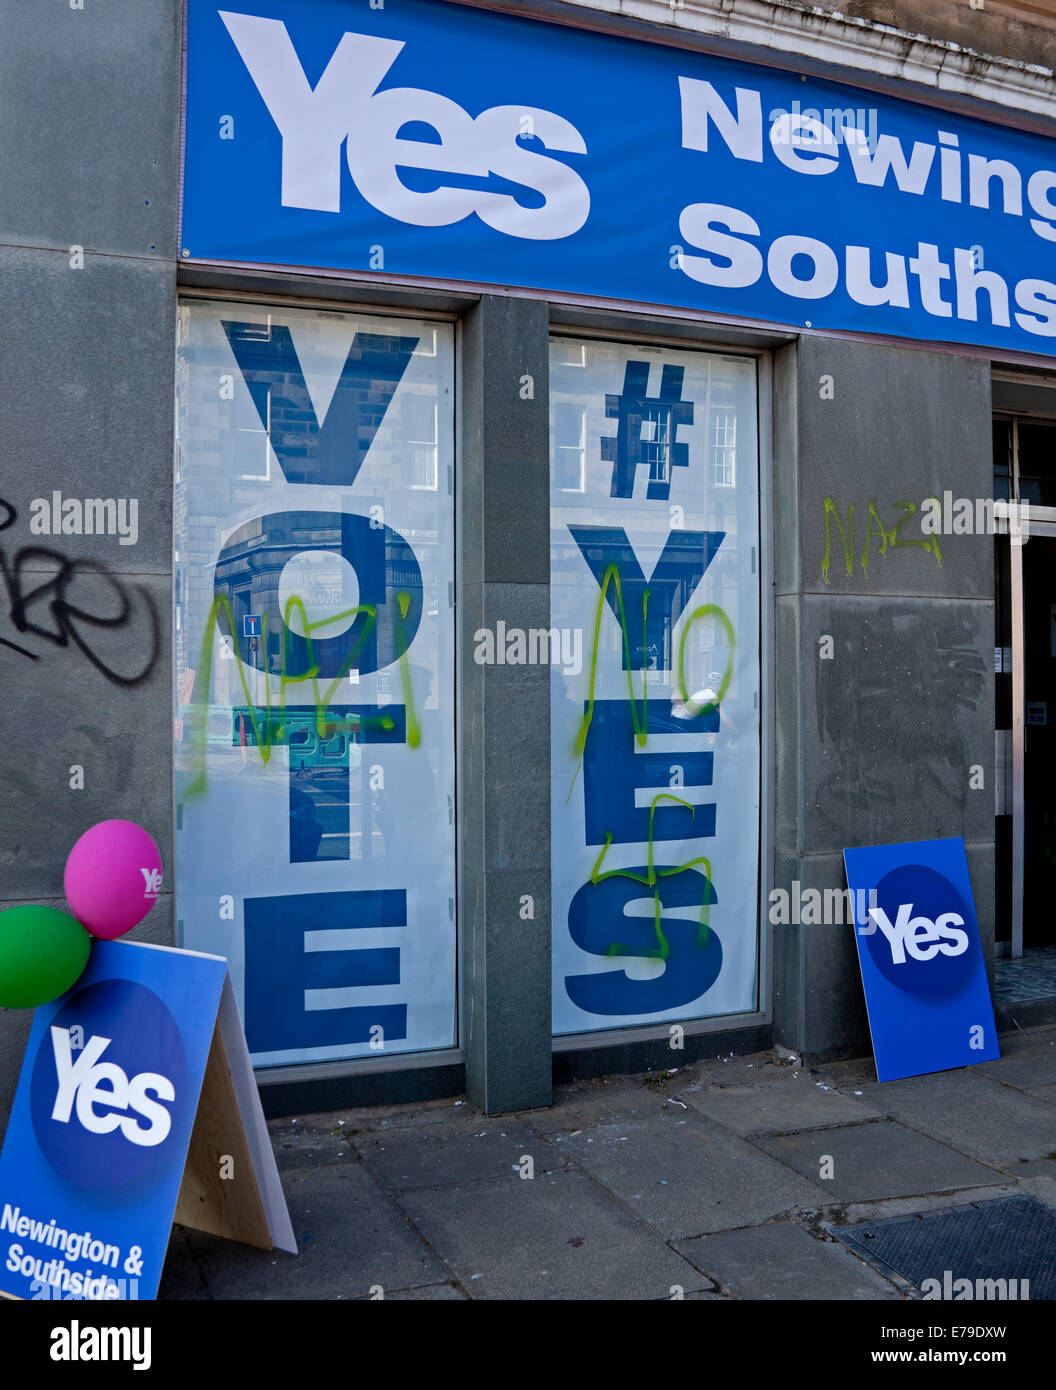 Edinburgh, Scotland,UK. 10th Sept. 2014. Independence Referendum, shop for Yes campaign daubed with nazi swastika and no slogans, in Newington, the premises were only opened yesterday at 3pm. Stock Photo